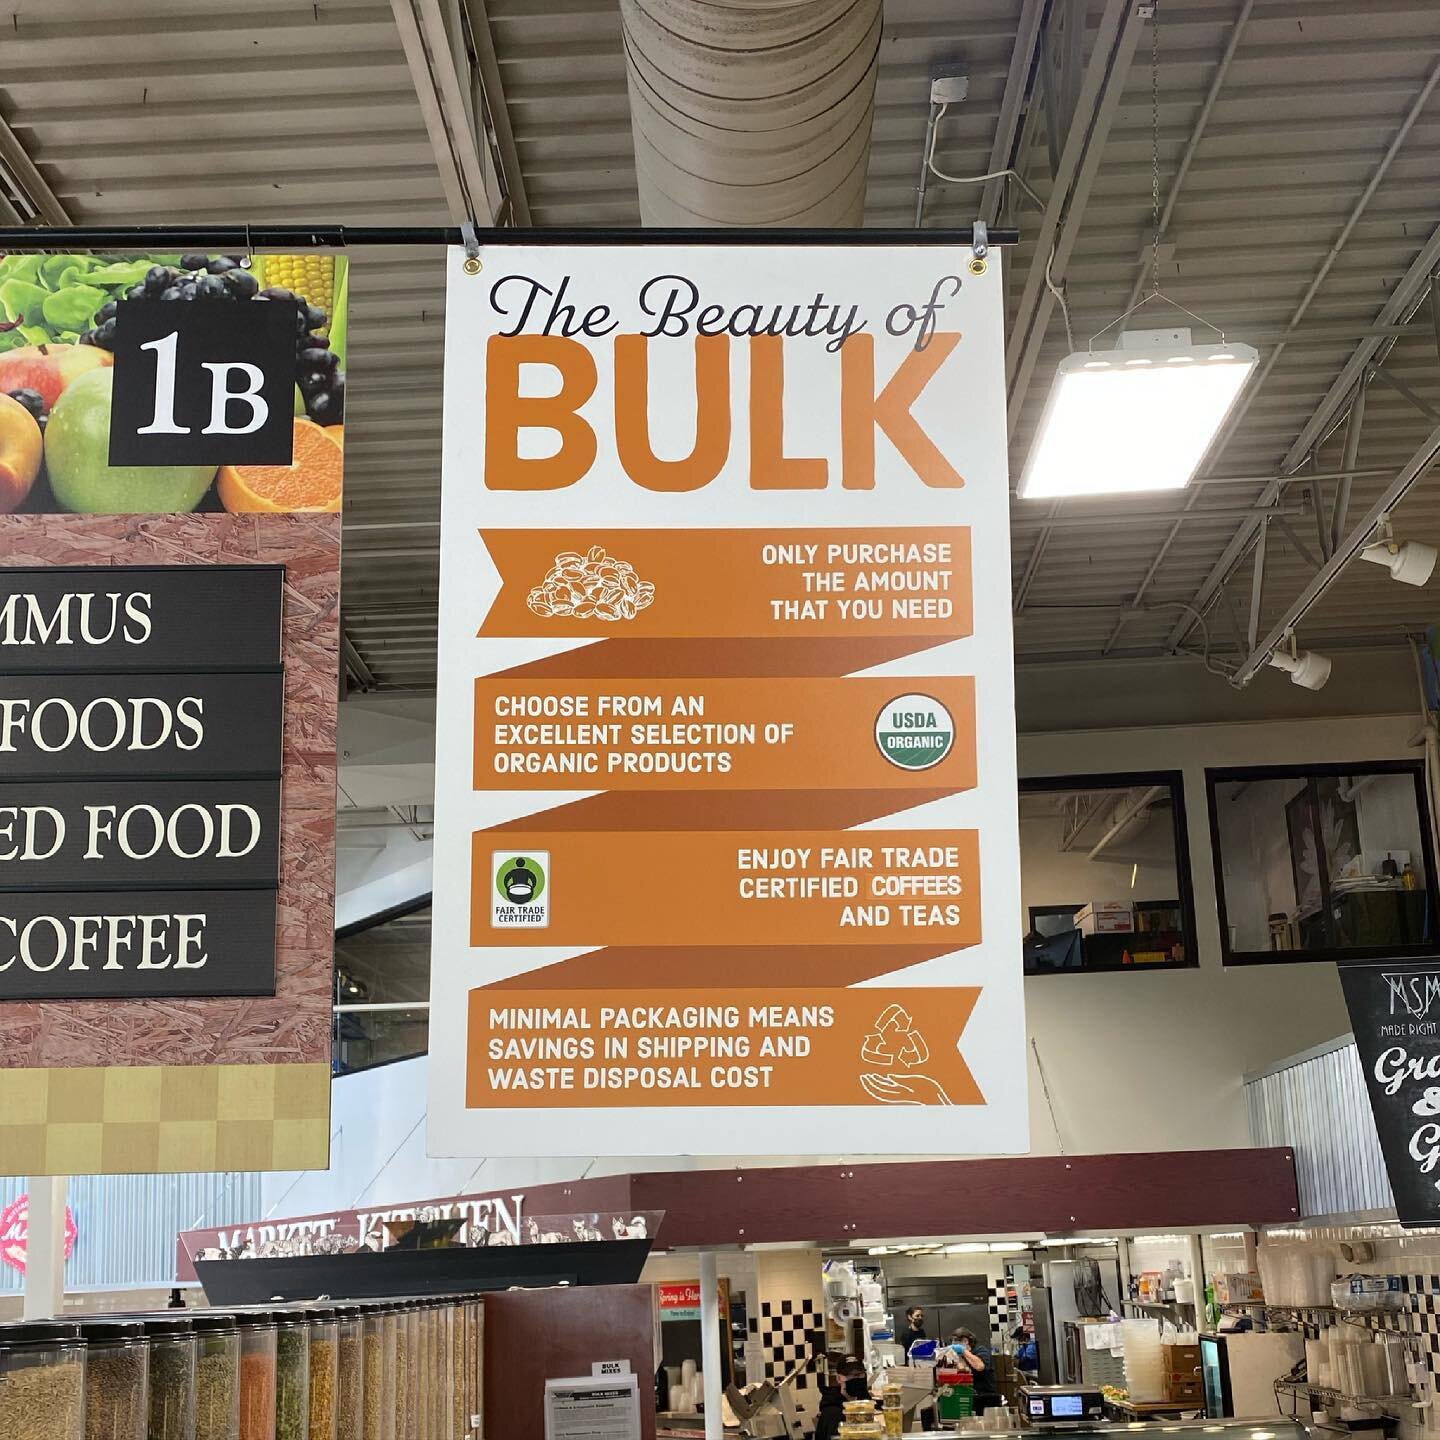 Check out this awesome sign about bulk shopping spotted in @mustardseedmrkt!

-

#zerowaste #zerowastechicago #environment #sustainability #sustainableliving #buylocal #localfood #chicagosustainability #chicagourbanag #lifestyle #gogreen #greenliving